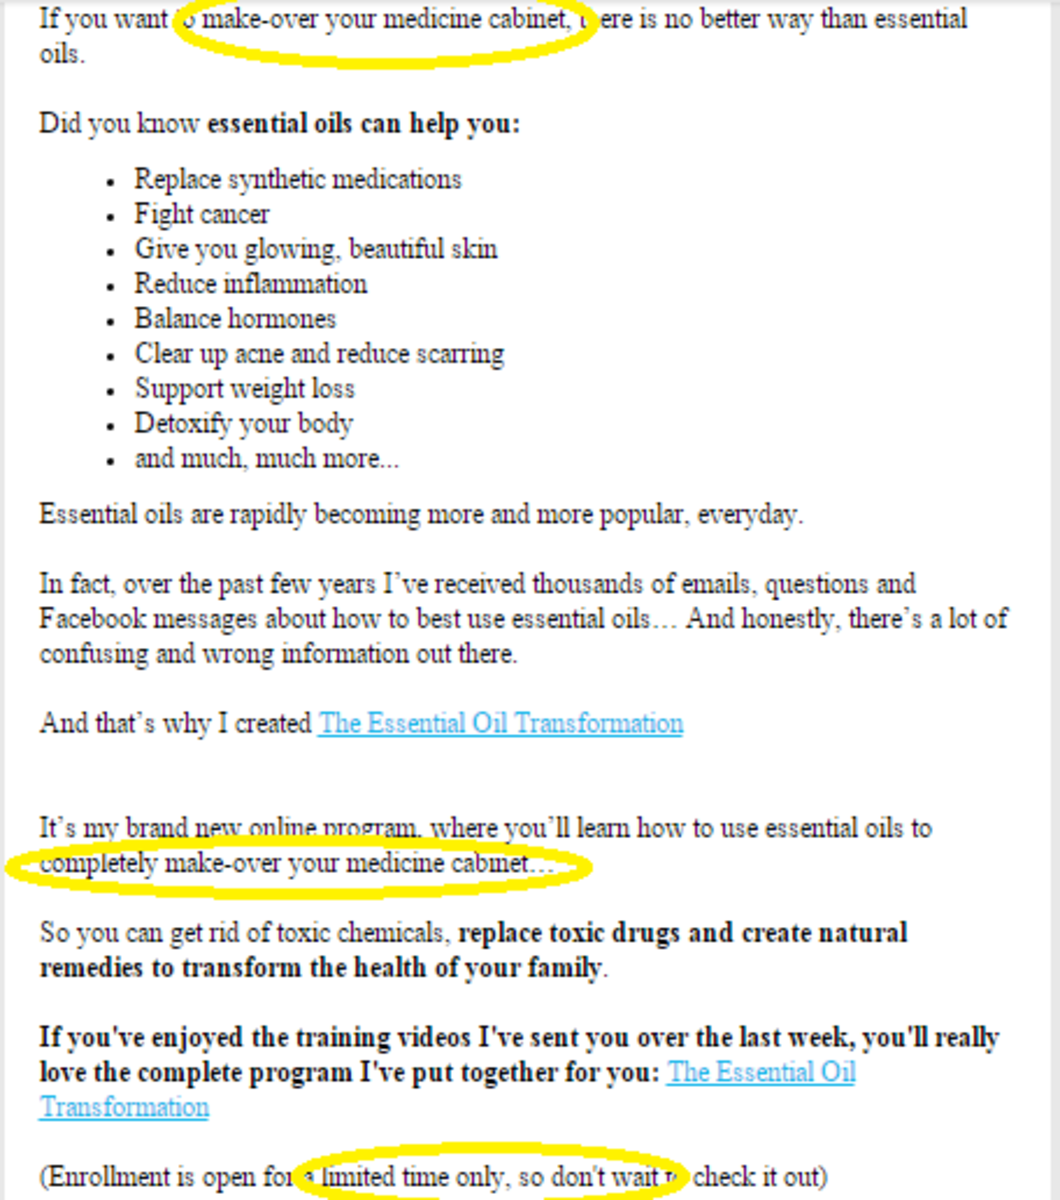 "Make Over Your Medicine Cabinet" parties are only hosted by essential oil marketing companies.  "Limited time offers" impulse you into deciding to buy now, a sales technique cautioned against by the FTC.